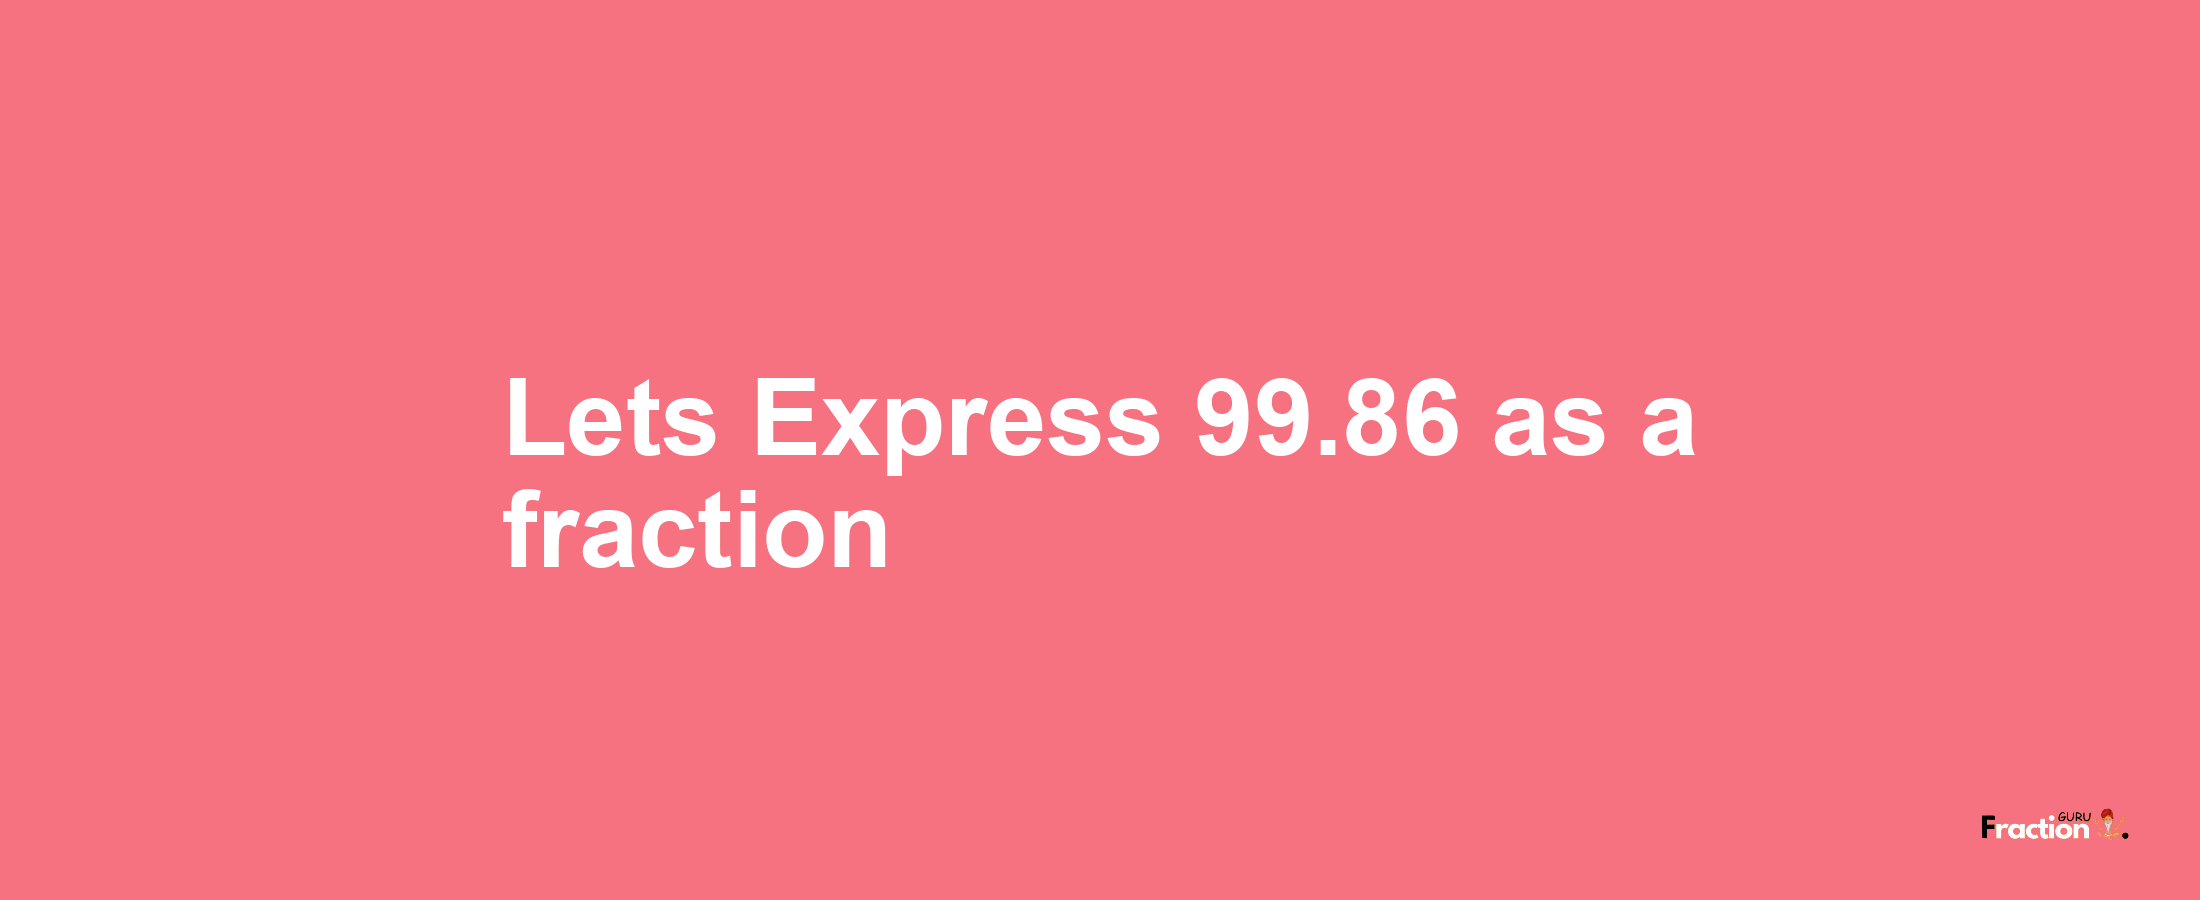 Lets Express 99.86 as afraction